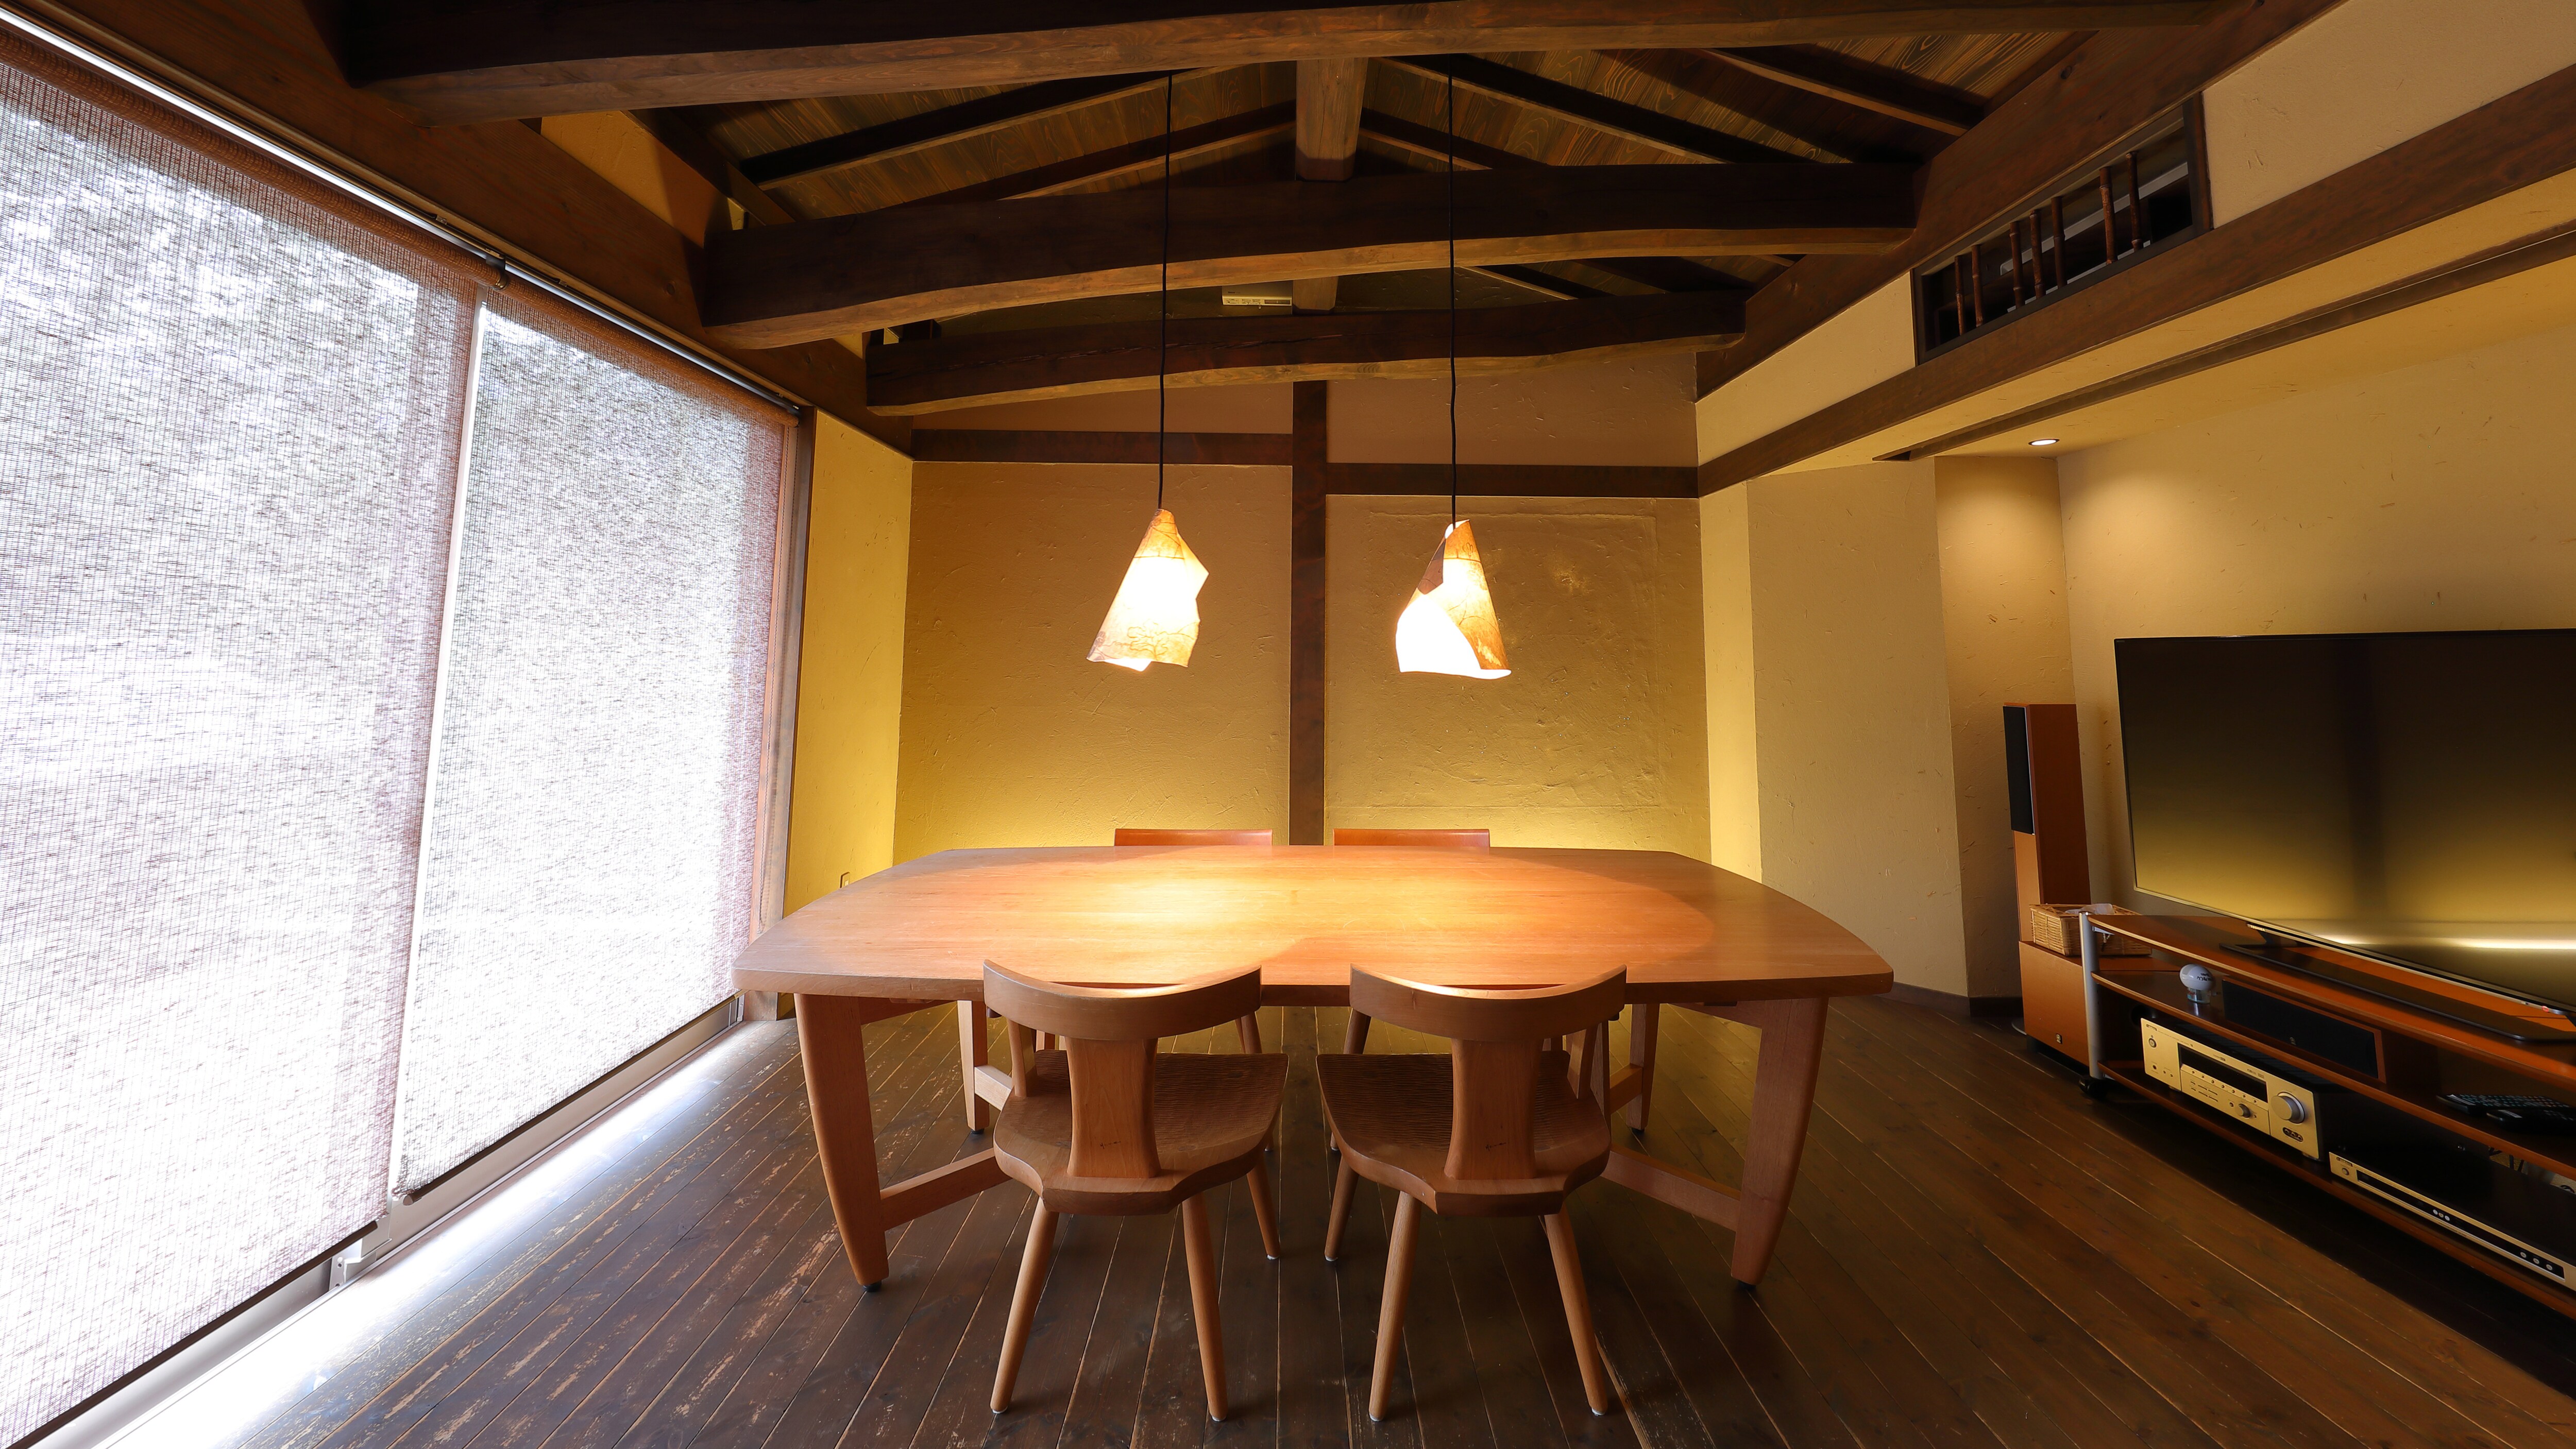 Special room [Hanare Kaguya] The restaurant is designed in the image of Taketori's old man's house.